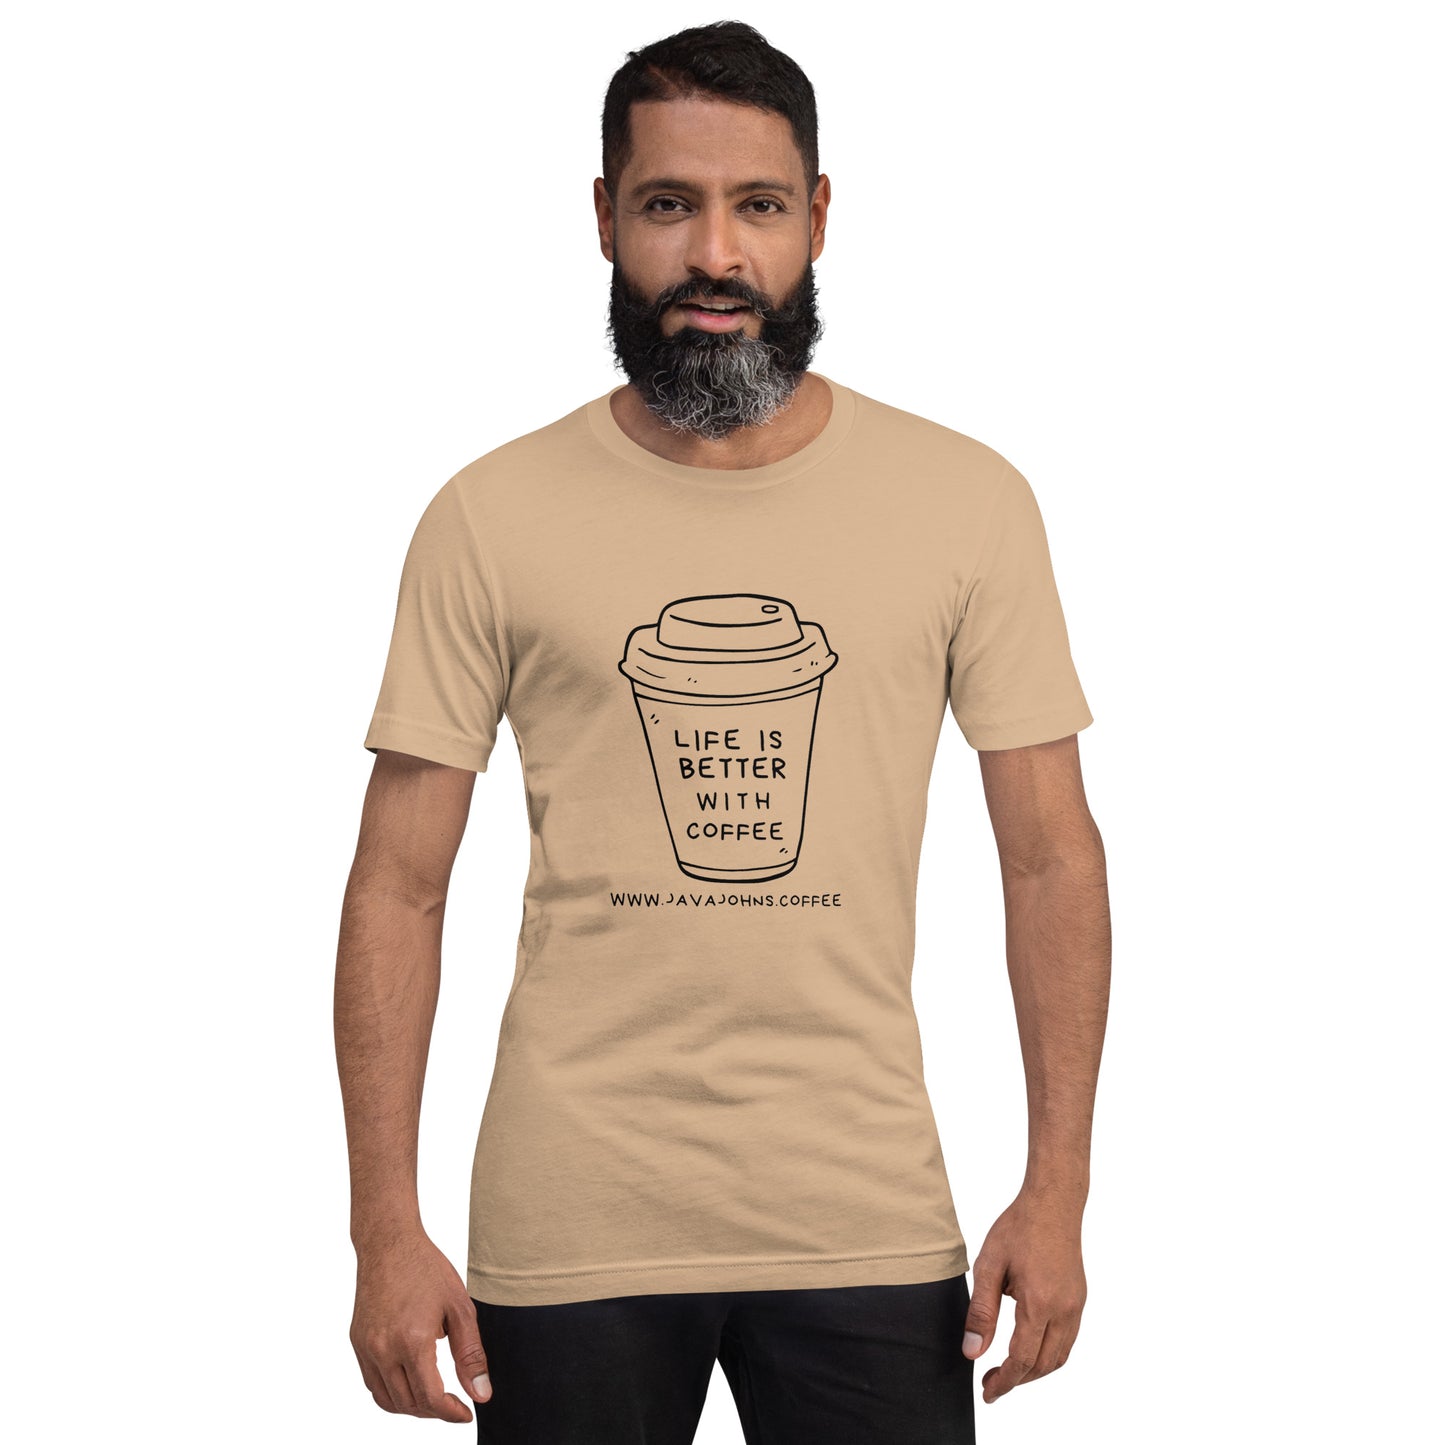 Life Is Better With Coffee Shirt